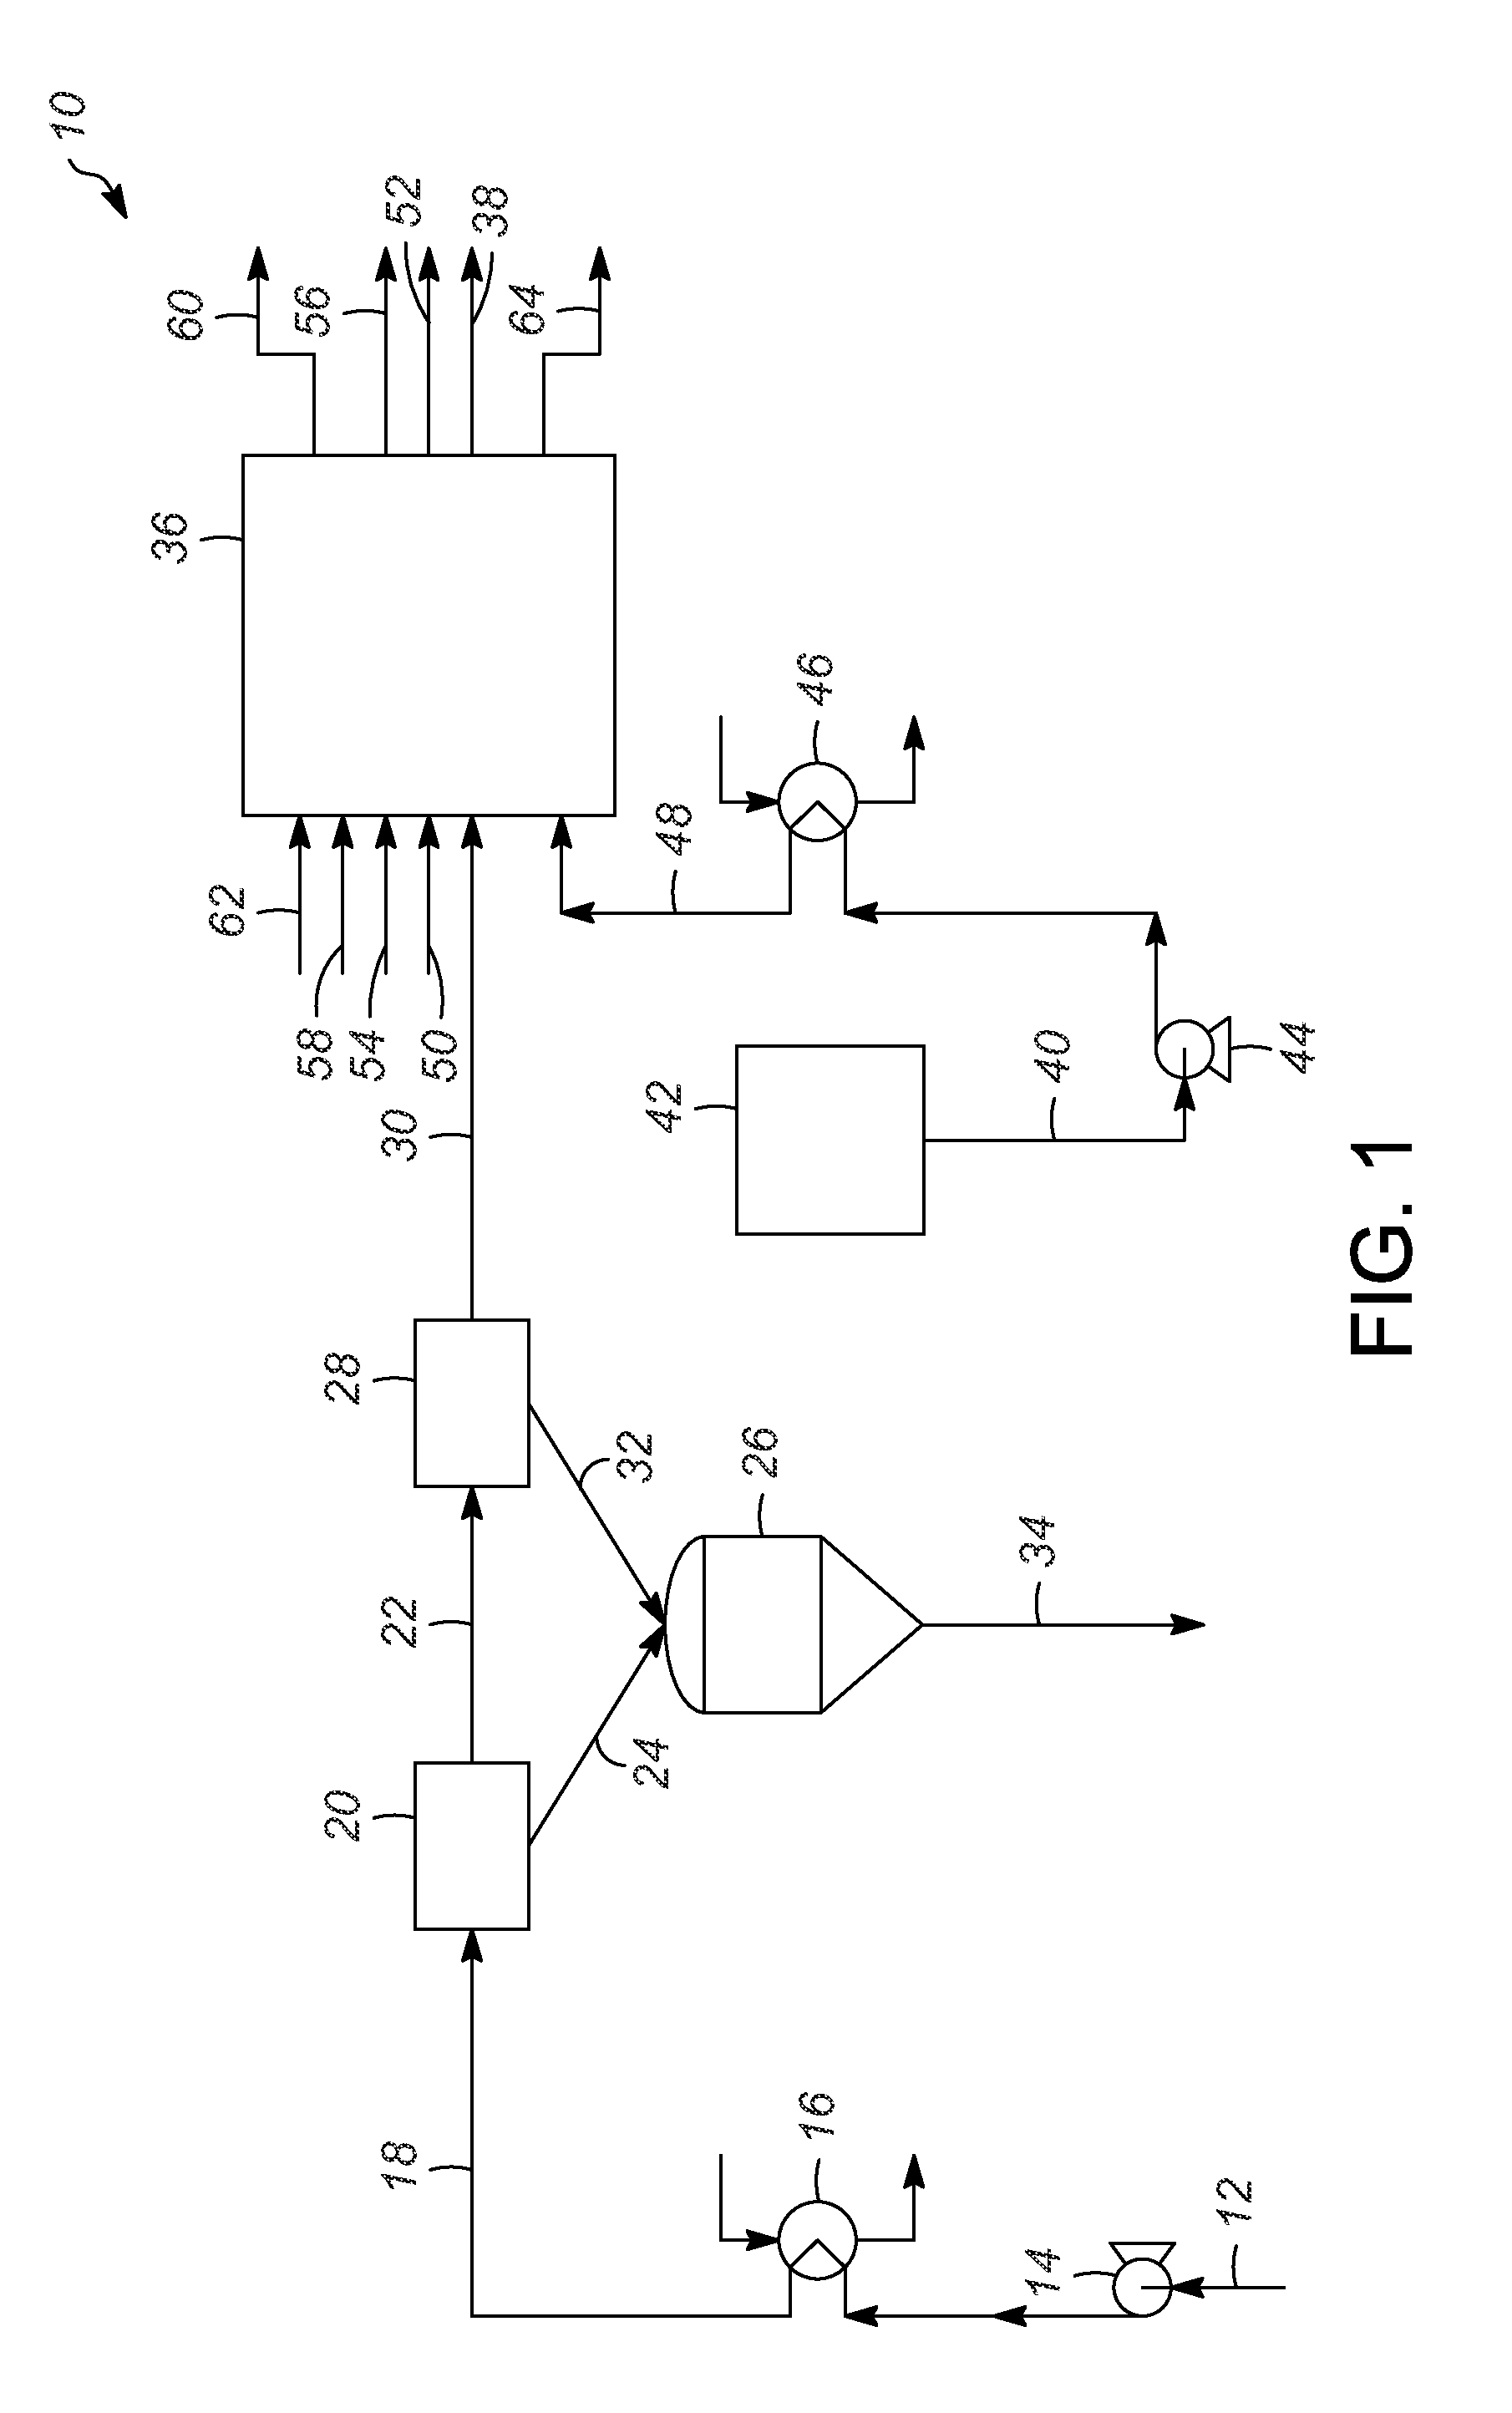 Methods and apparatuses for forming low-metal biomass-derived pyrolysis oil